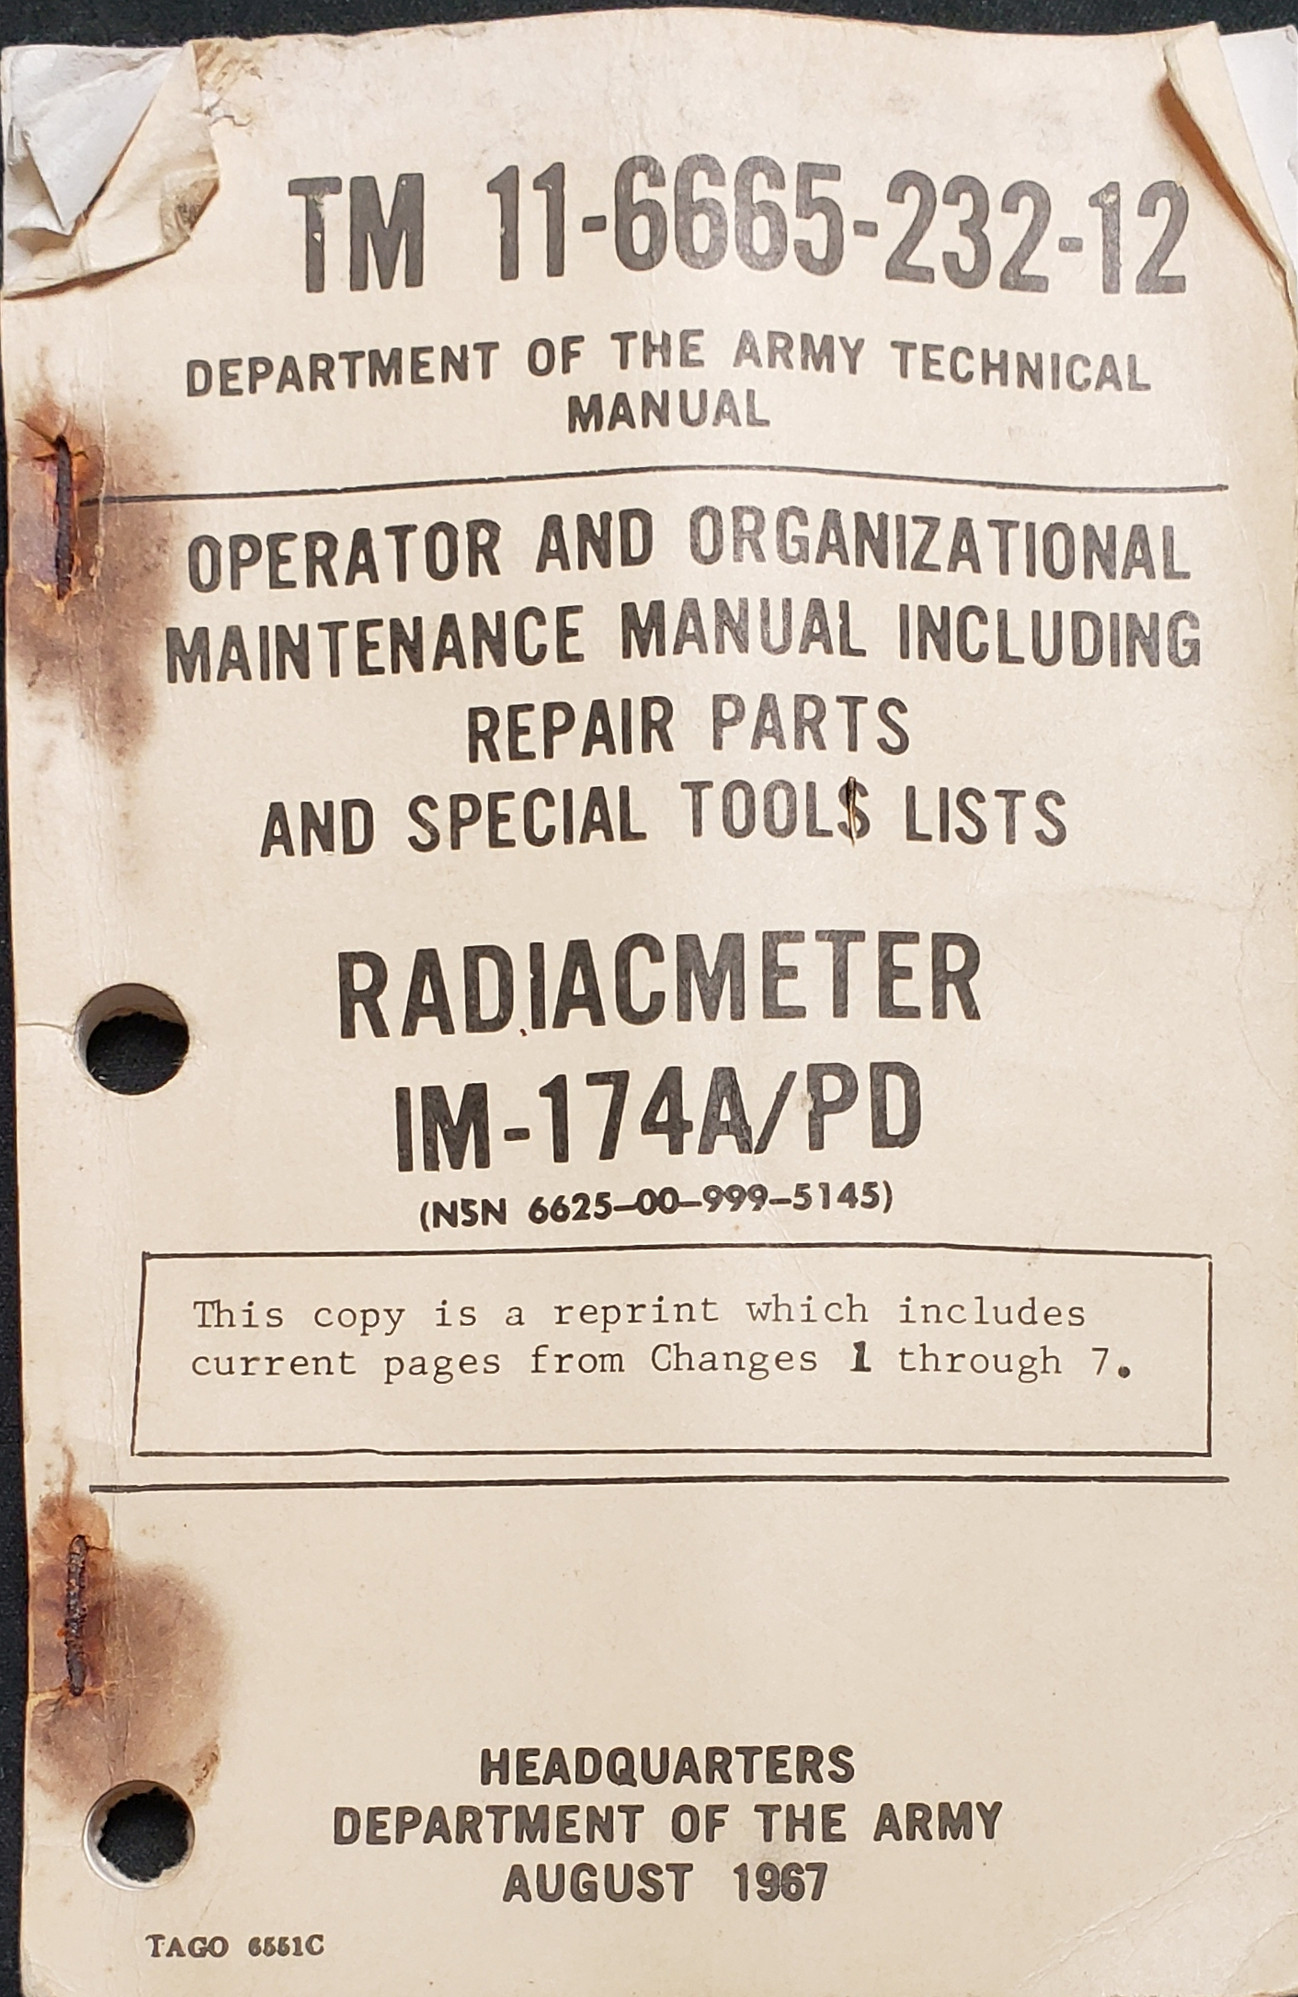 US Armed Forces Field Manual - Operator and Org. Maintenance Manual for Radiacmeter IM-174A (1967)